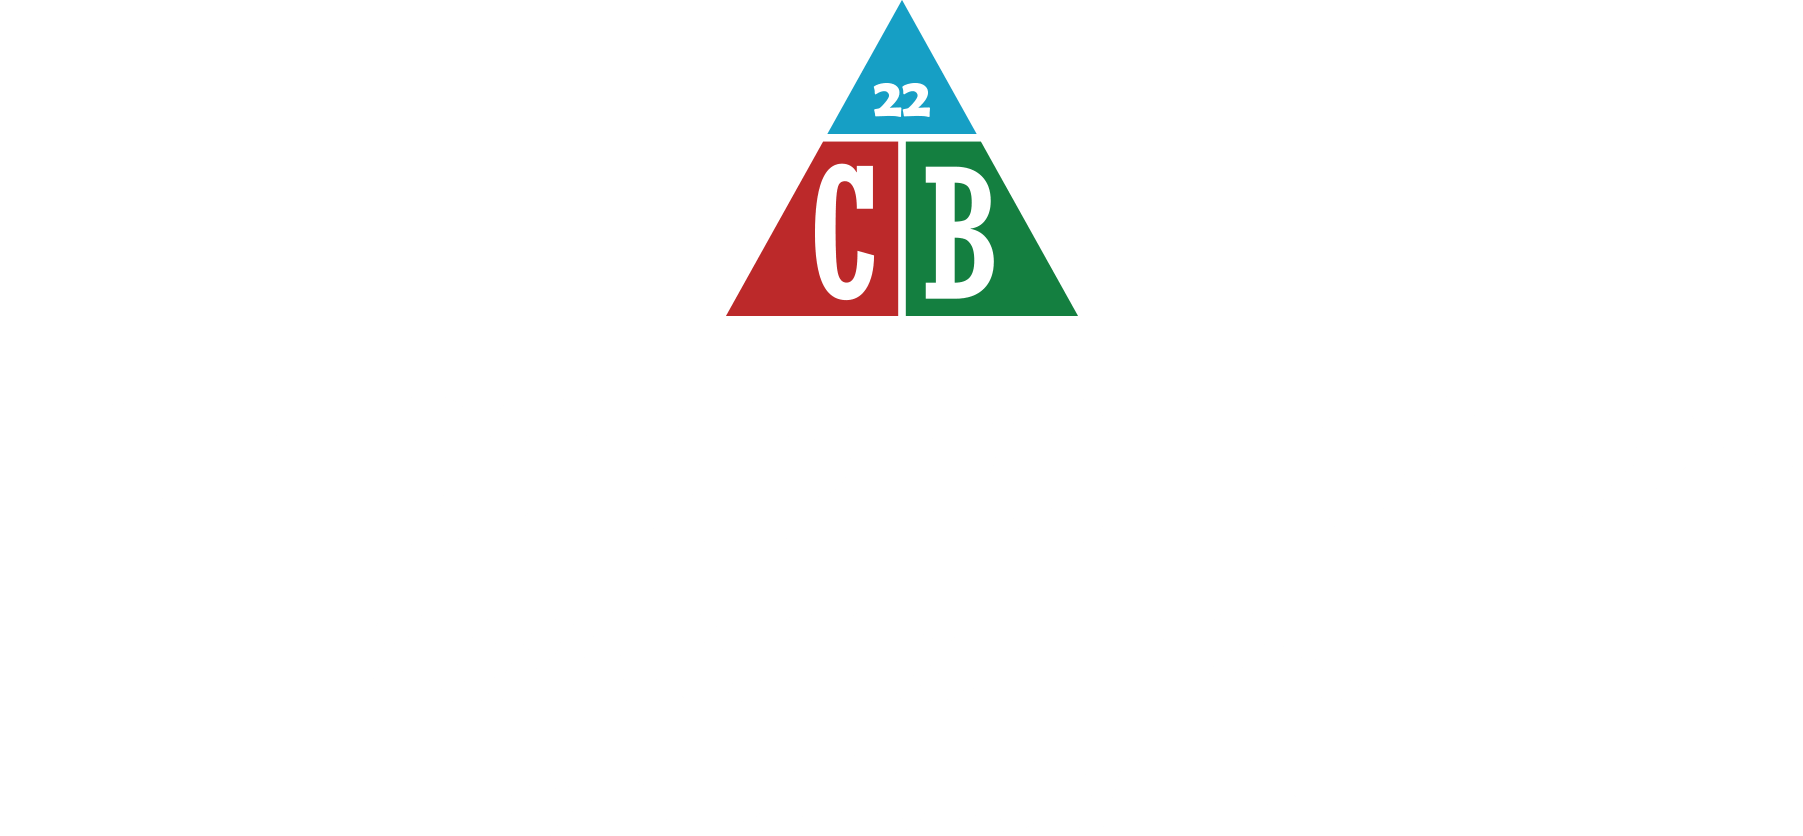 THE CAMP BOOK 2022 2022.6.11-12 @富士見高原リゾート